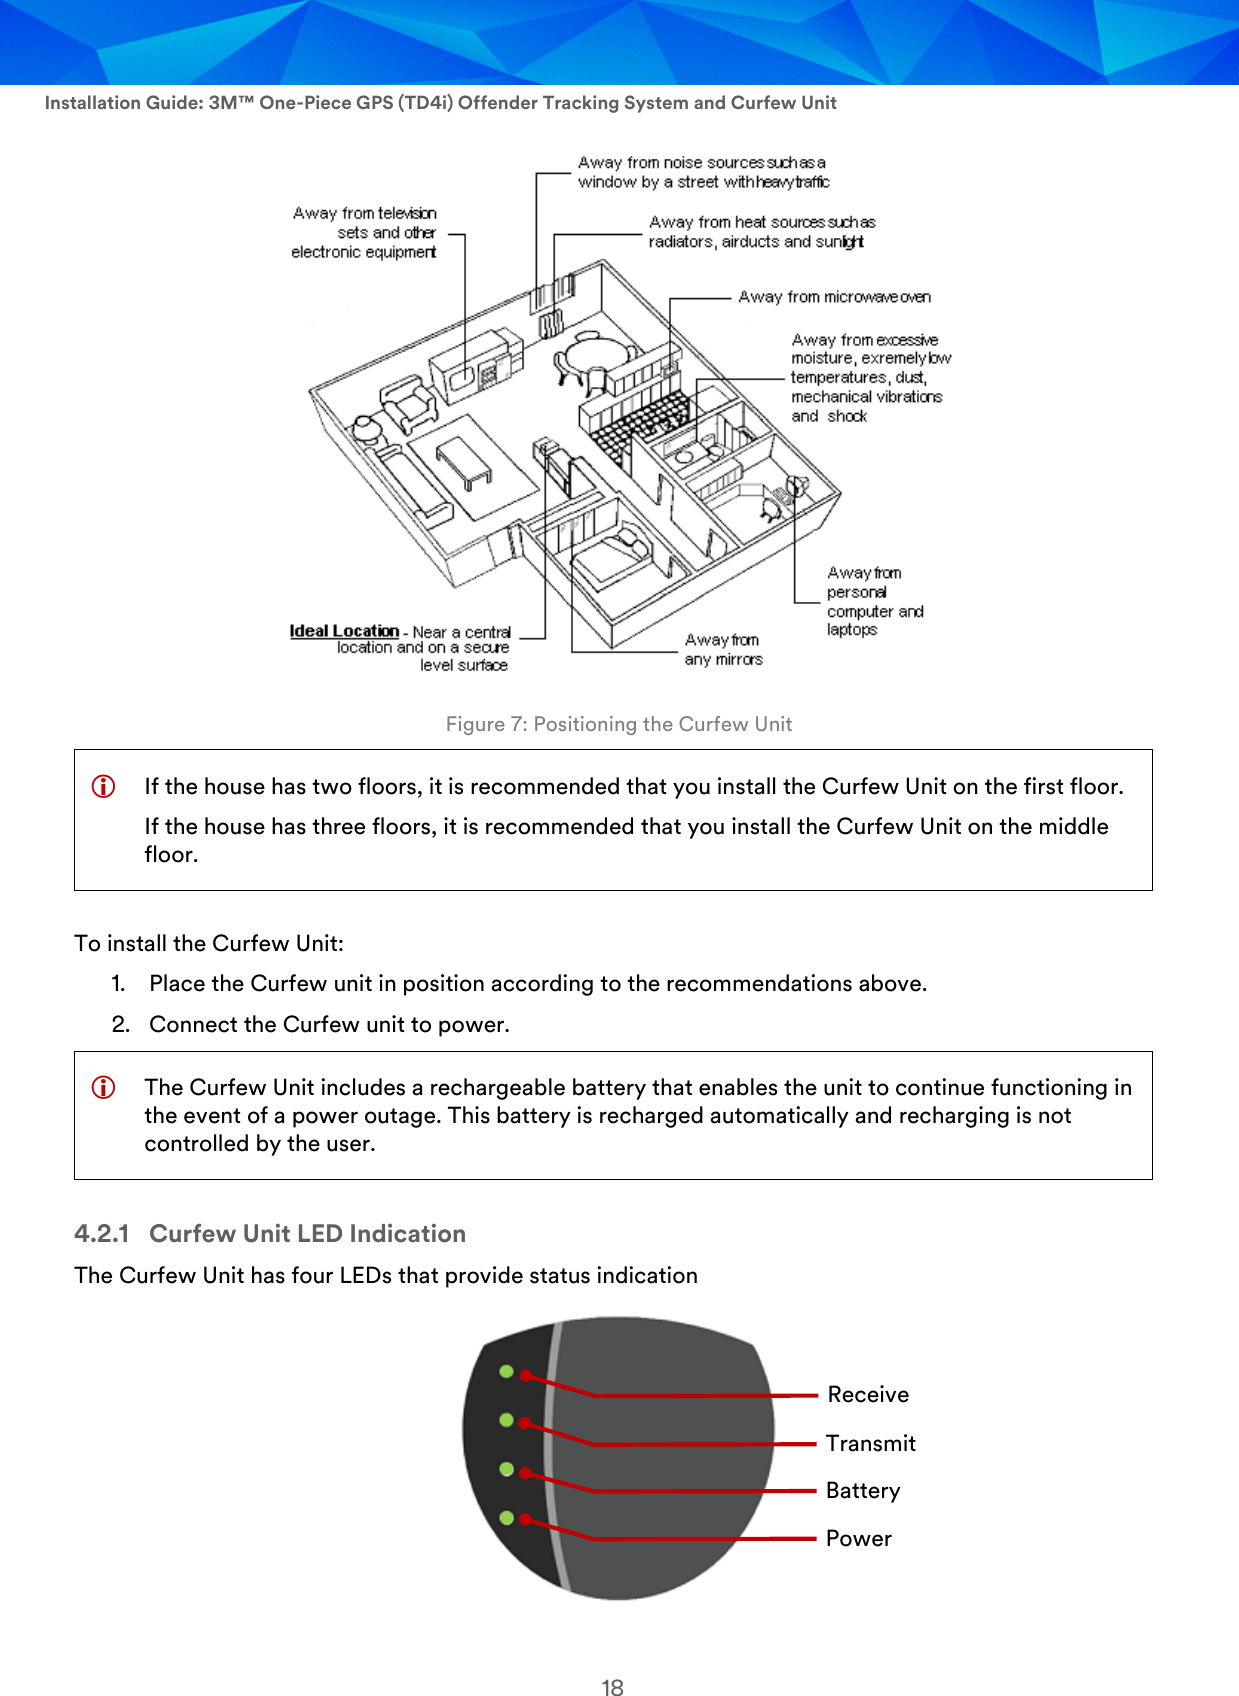  Installation Guide: 3M™ One-Piece GPS (TD4i) Offender Tracking System and Curfew Unit 18  Figure 7: Positioning the Curfew Unit  If the house has two floors, it is recommended that you install the Curfew Unit on the first floor. If the house has three floors, it is recommended that you install the Curfew Unit on the middle floor. To install the Curfew Unit: 1. Place the Curfew unit in position according to the recommendations above. 2. Connect the Curfew unit to power.  The Curfew Unit includes a rechargeable battery that enables the unit to continue functioning in the event of a power outage. This battery is recharged automatically and recharging is not controlled by the user. 4.2.1 Curfew Unit LED Indication The Curfew Unit has four LEDs that provide status indication   Receive Transmit Power Battery 